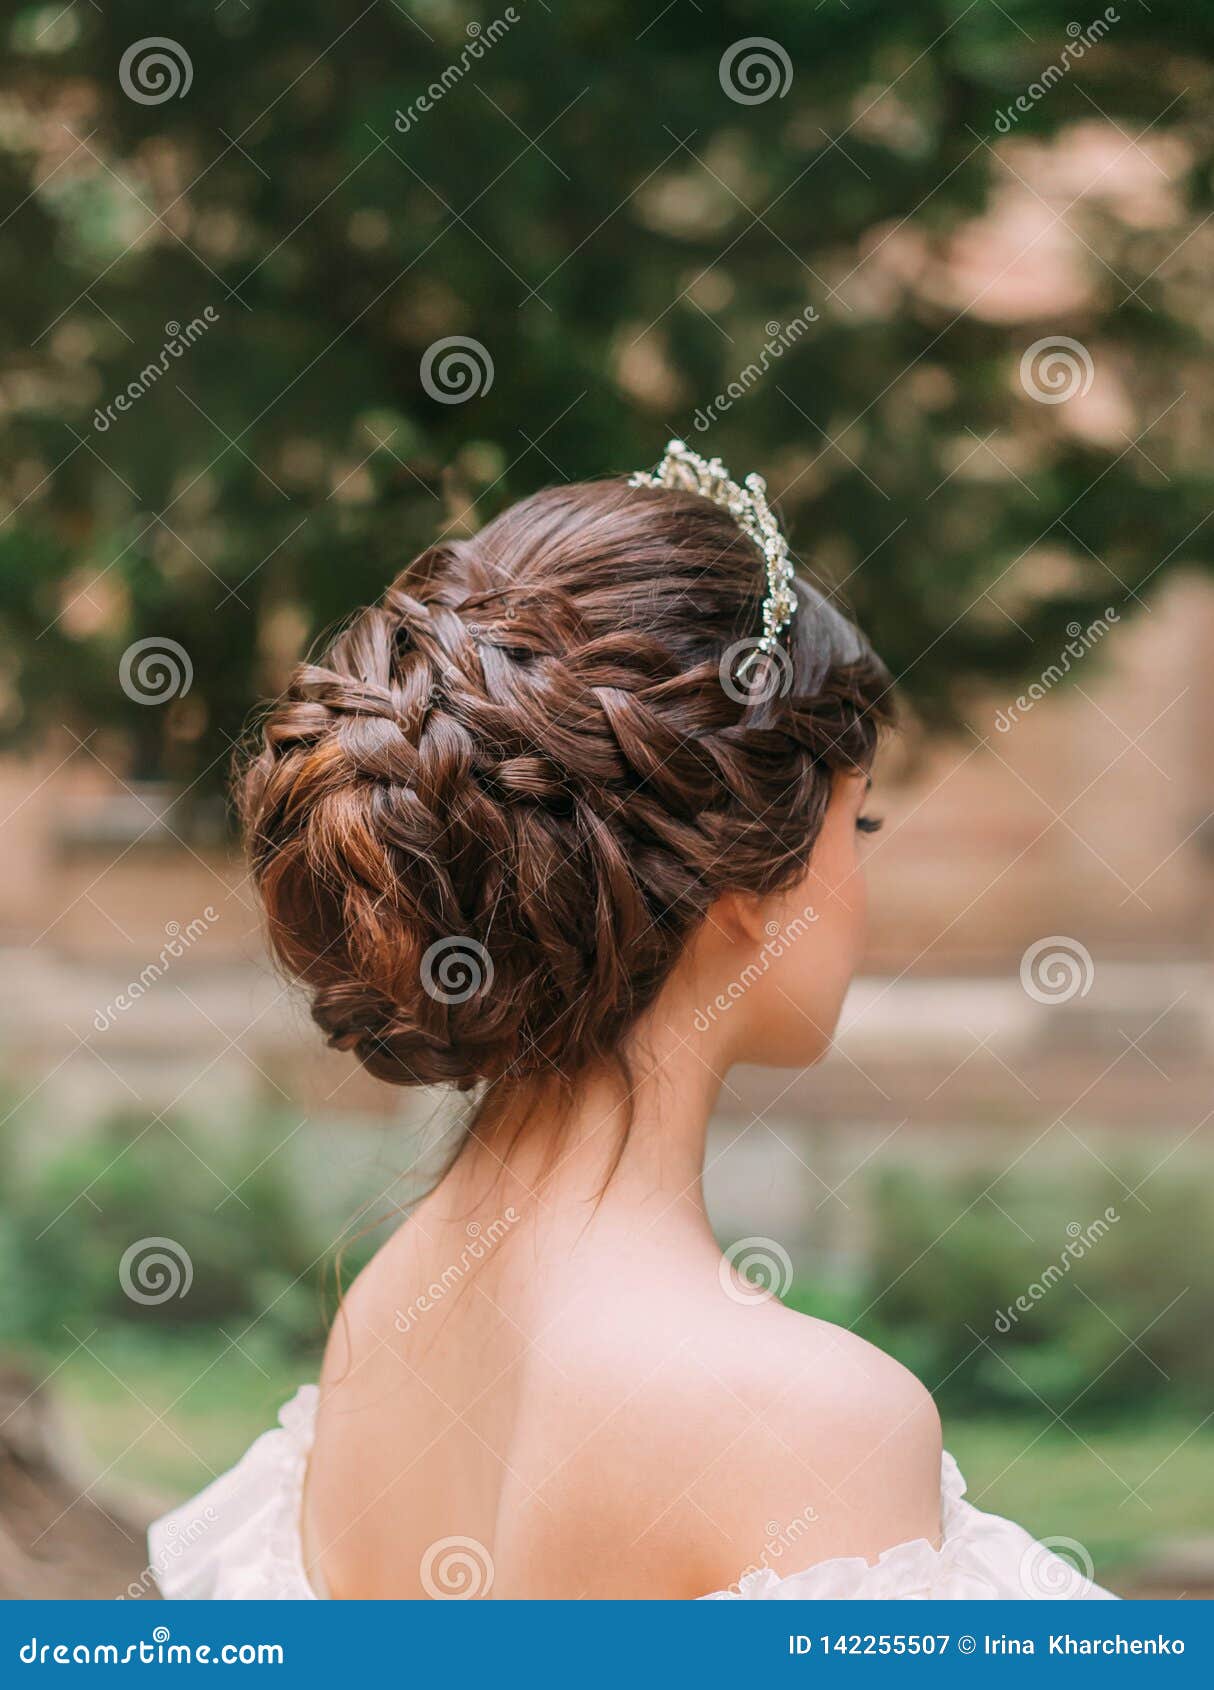 Amazing Work of Professional Hairdresser, Gentle Hairstyle of Long Dark  Brown Hair and Tiara for Prom or Evening Stock Image - Image of blonde,  long: 142255507